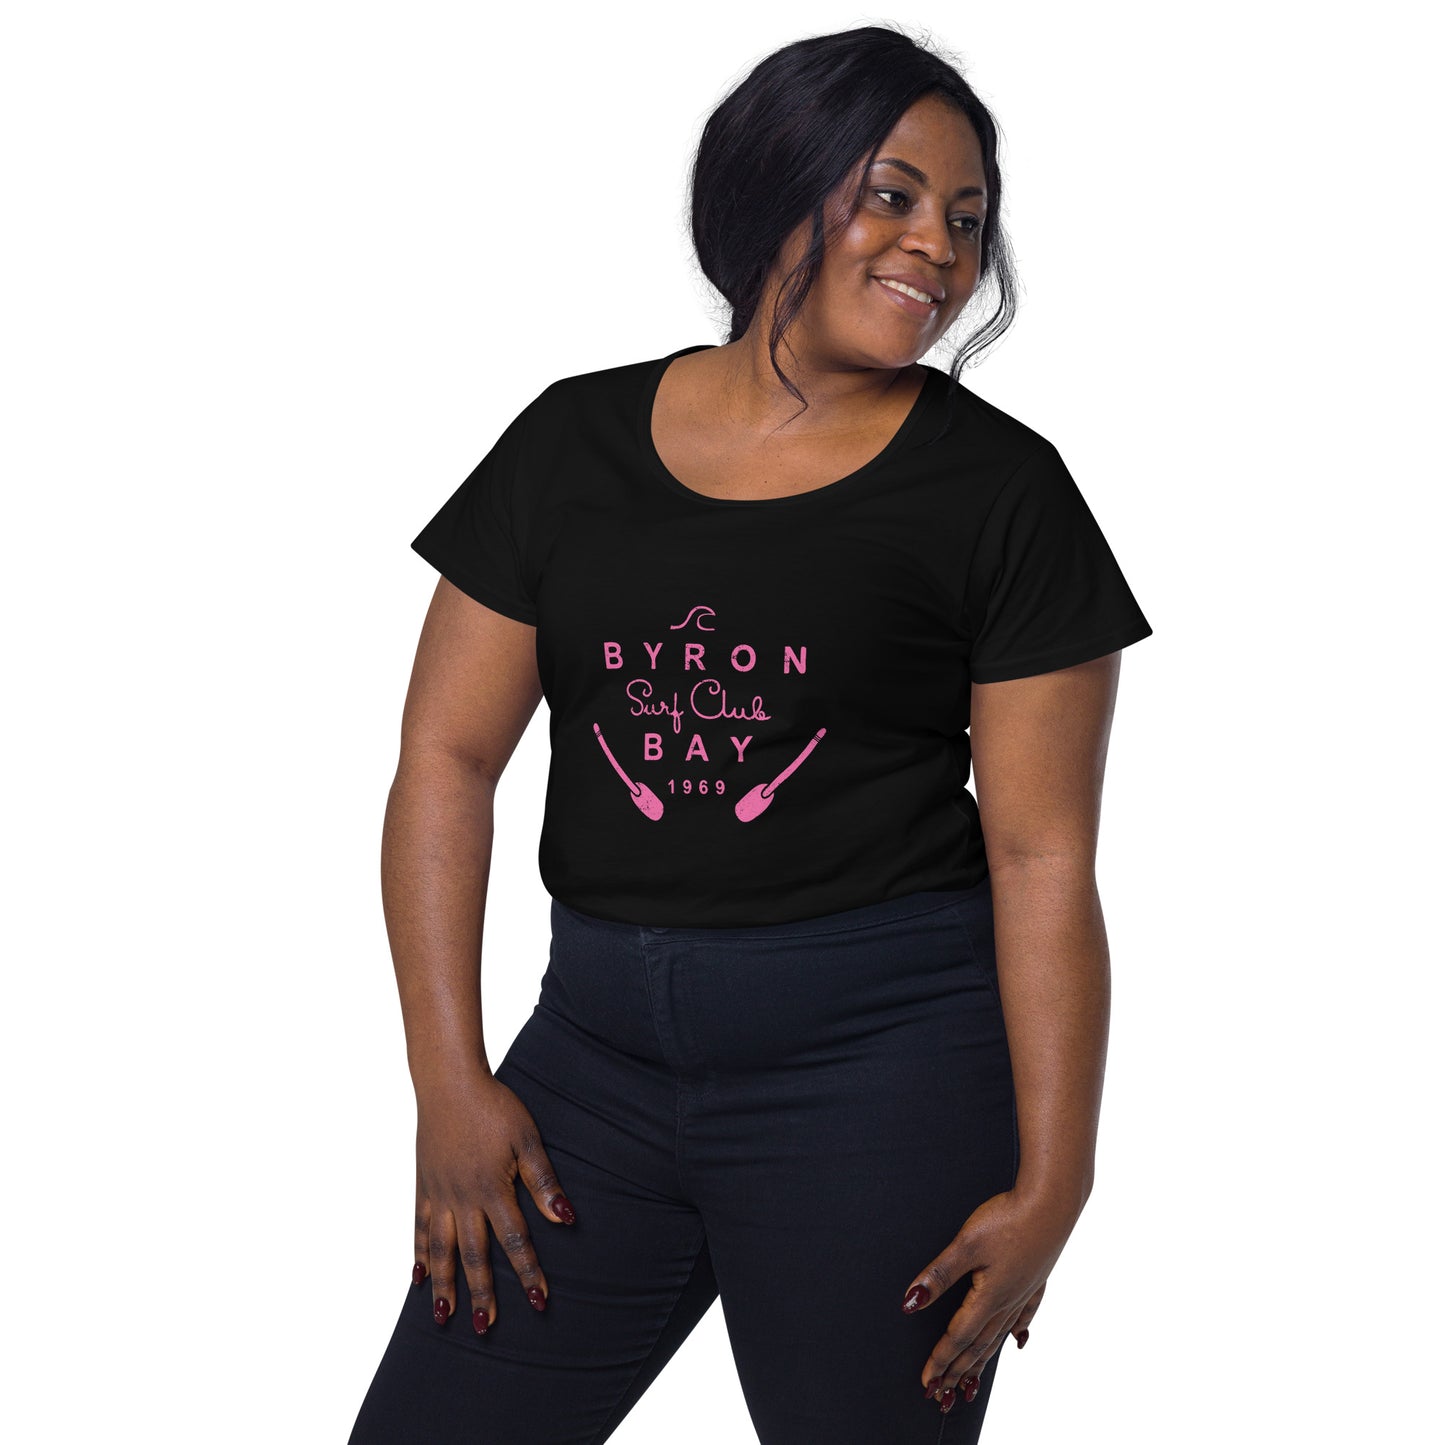  Women’s Round Neck Tee - Black - Front view, on woman standing with arms by side - pink Byron Bay Surf Club logo on front - Genuine Byron Bay Merchandise | Produced by Go Sea Kayak Byron Bay 